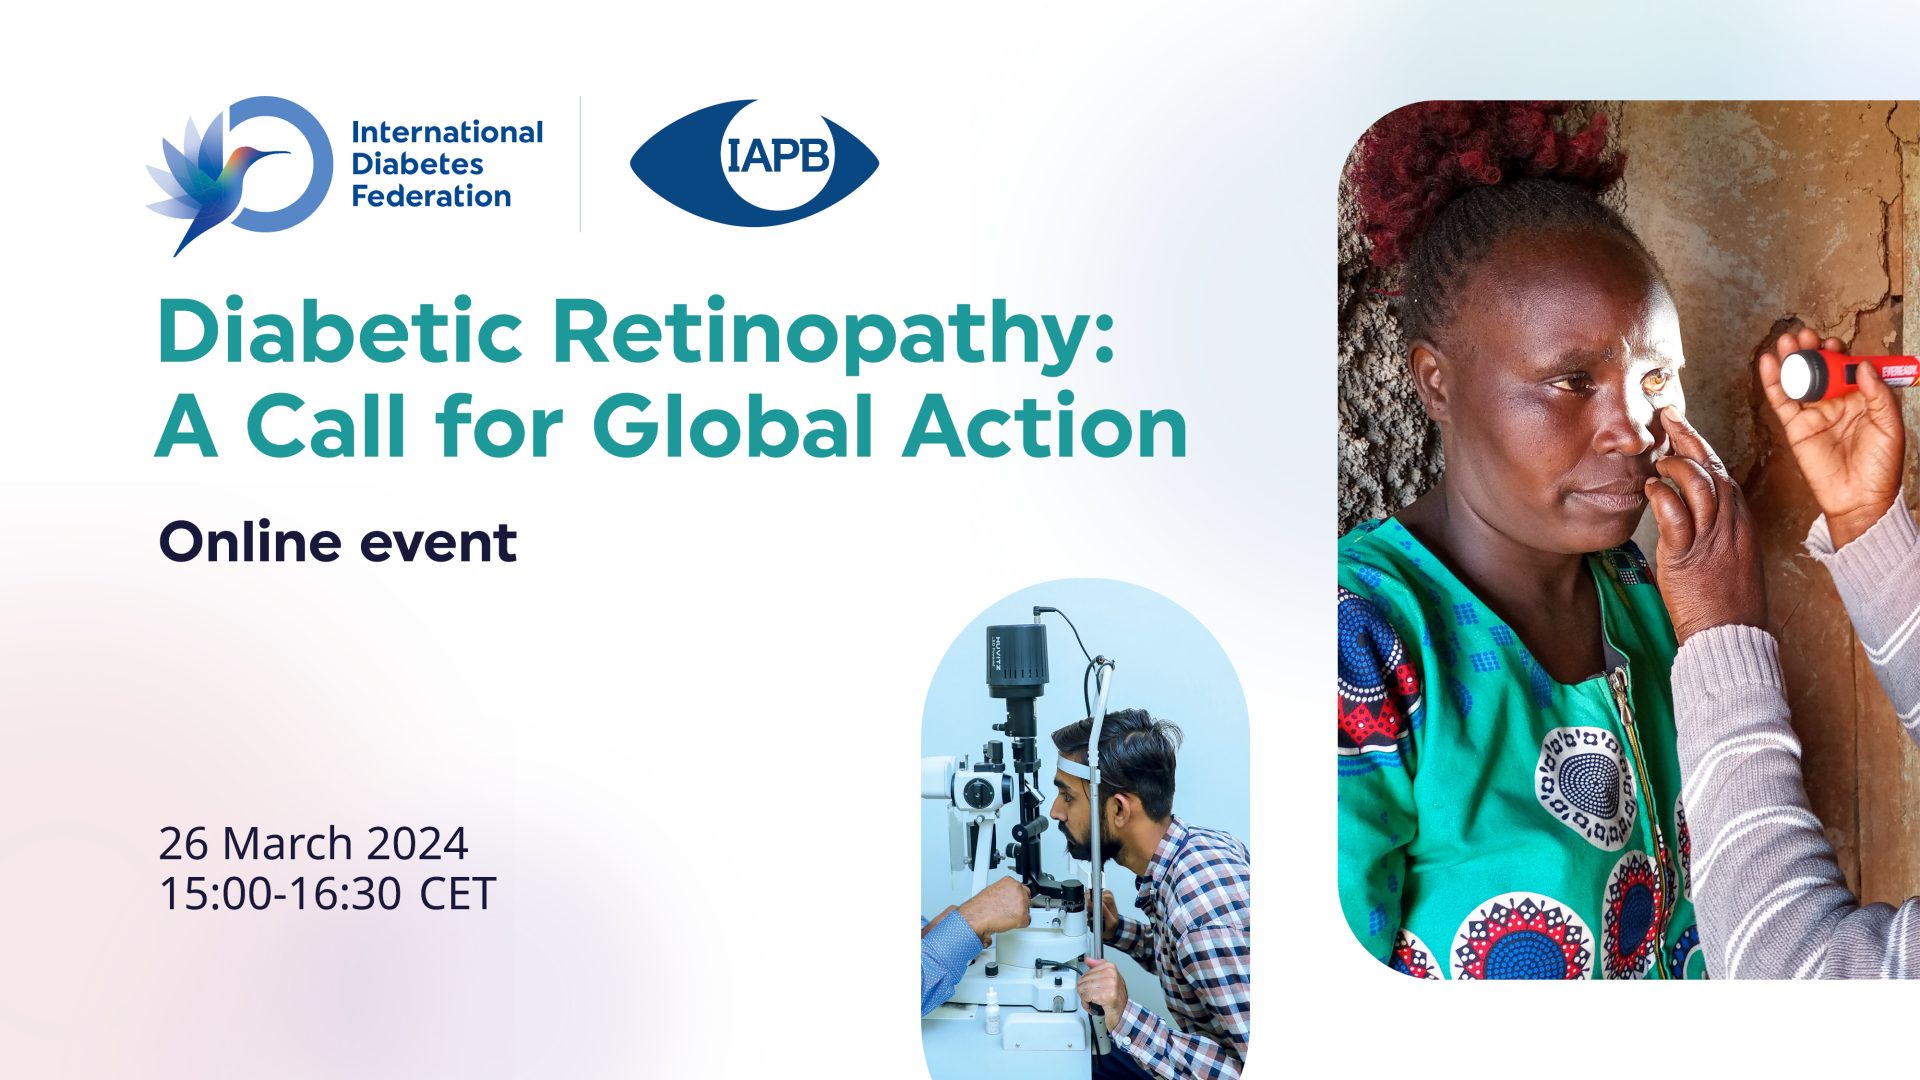 Diabetic retinopathy: a call for global action